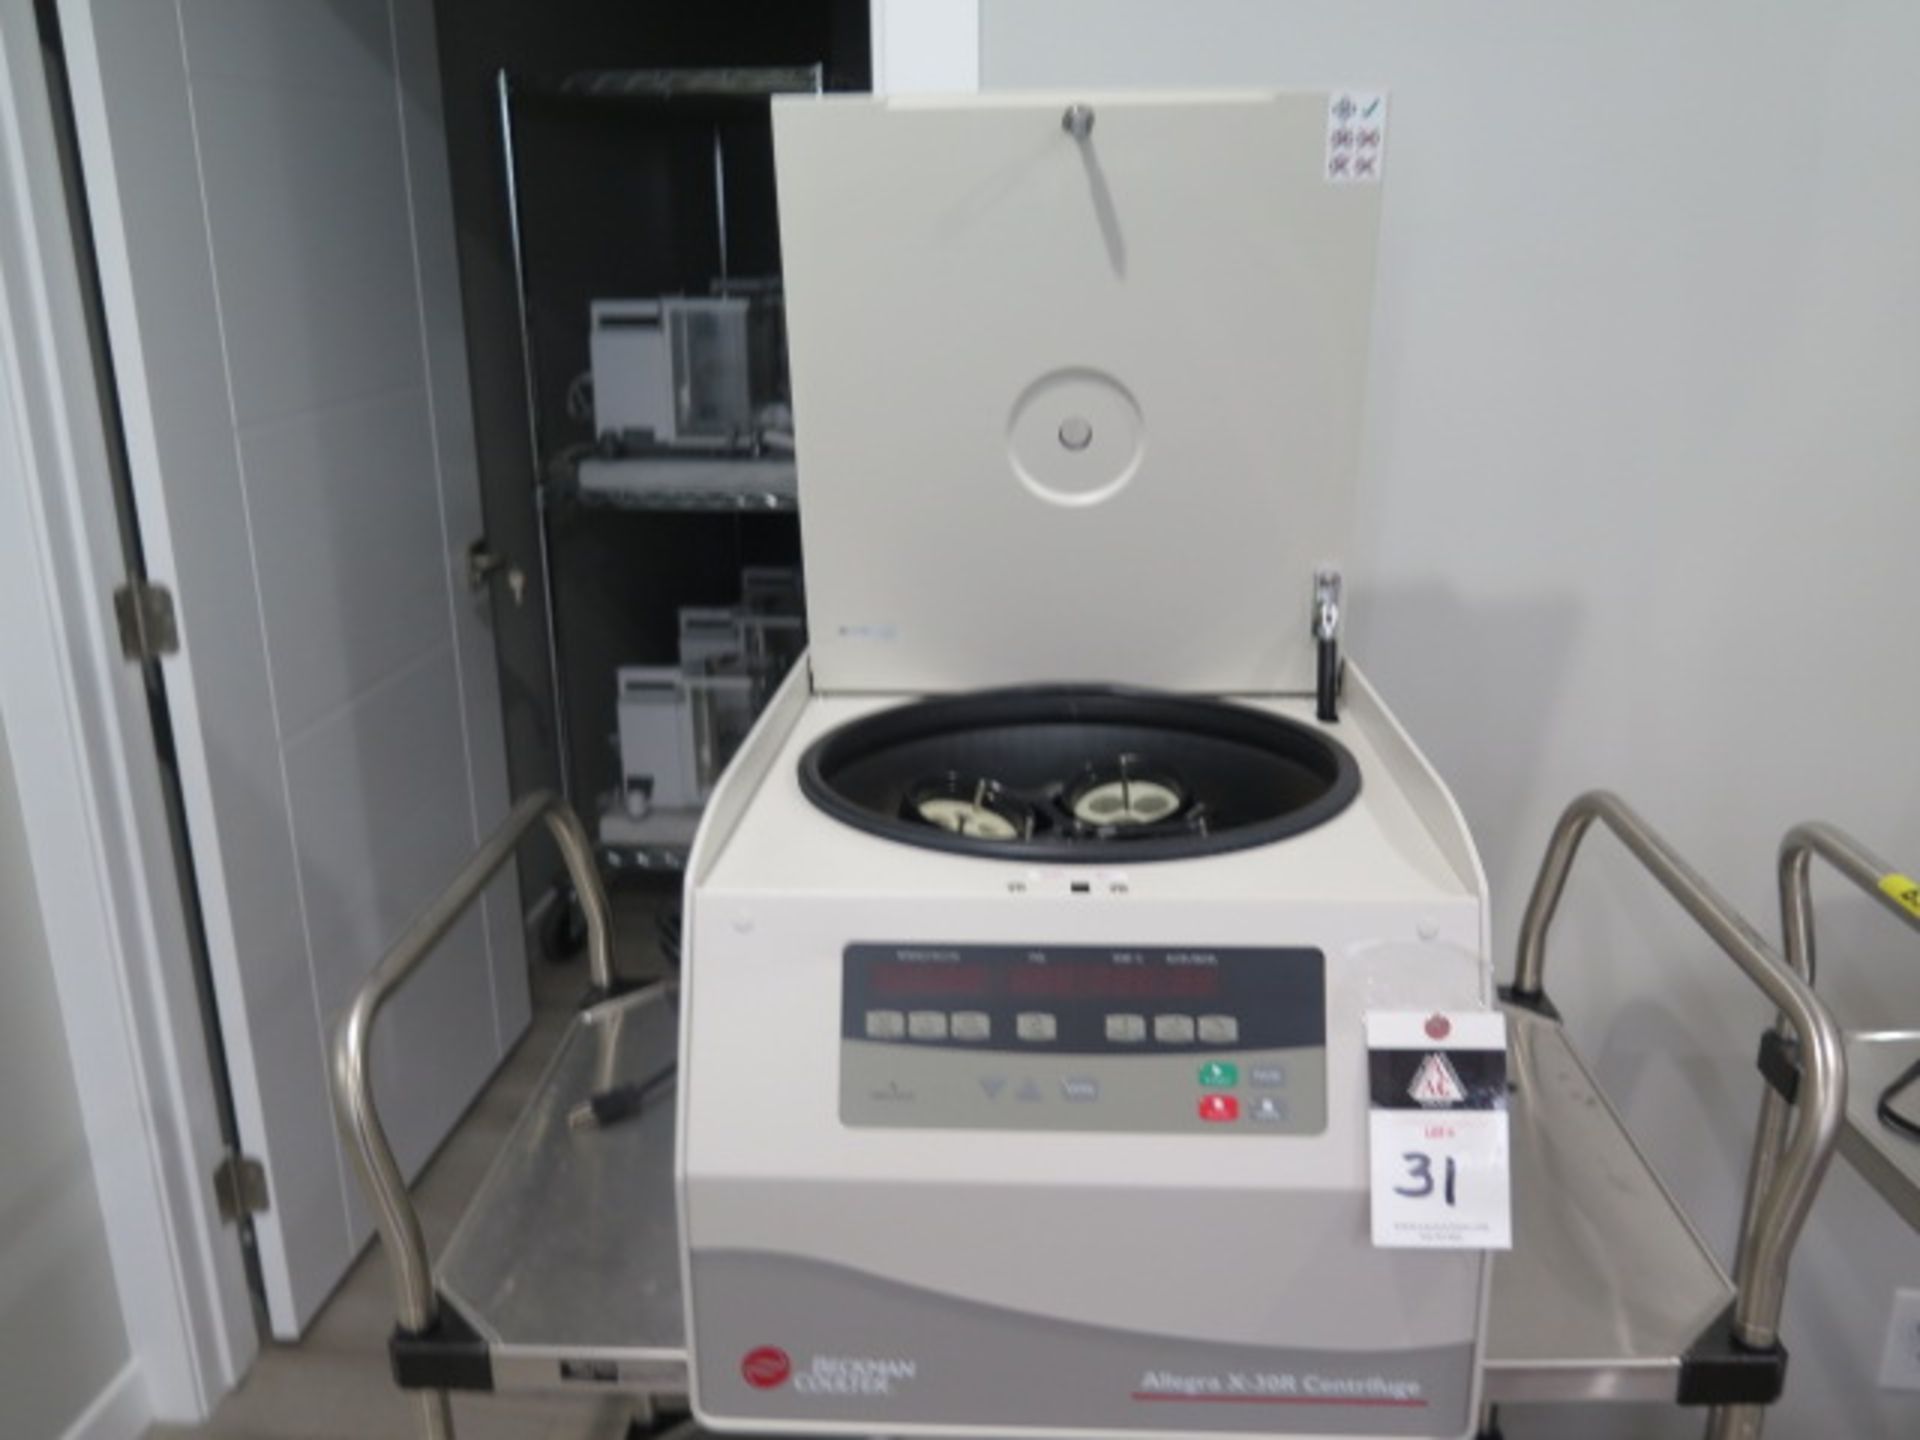 Beckman Coulter Allegra X-30R Centrifuge s/n ALZ19A083 (SOLD AS-IS - NO WARRANTY) - Image 2 of 11